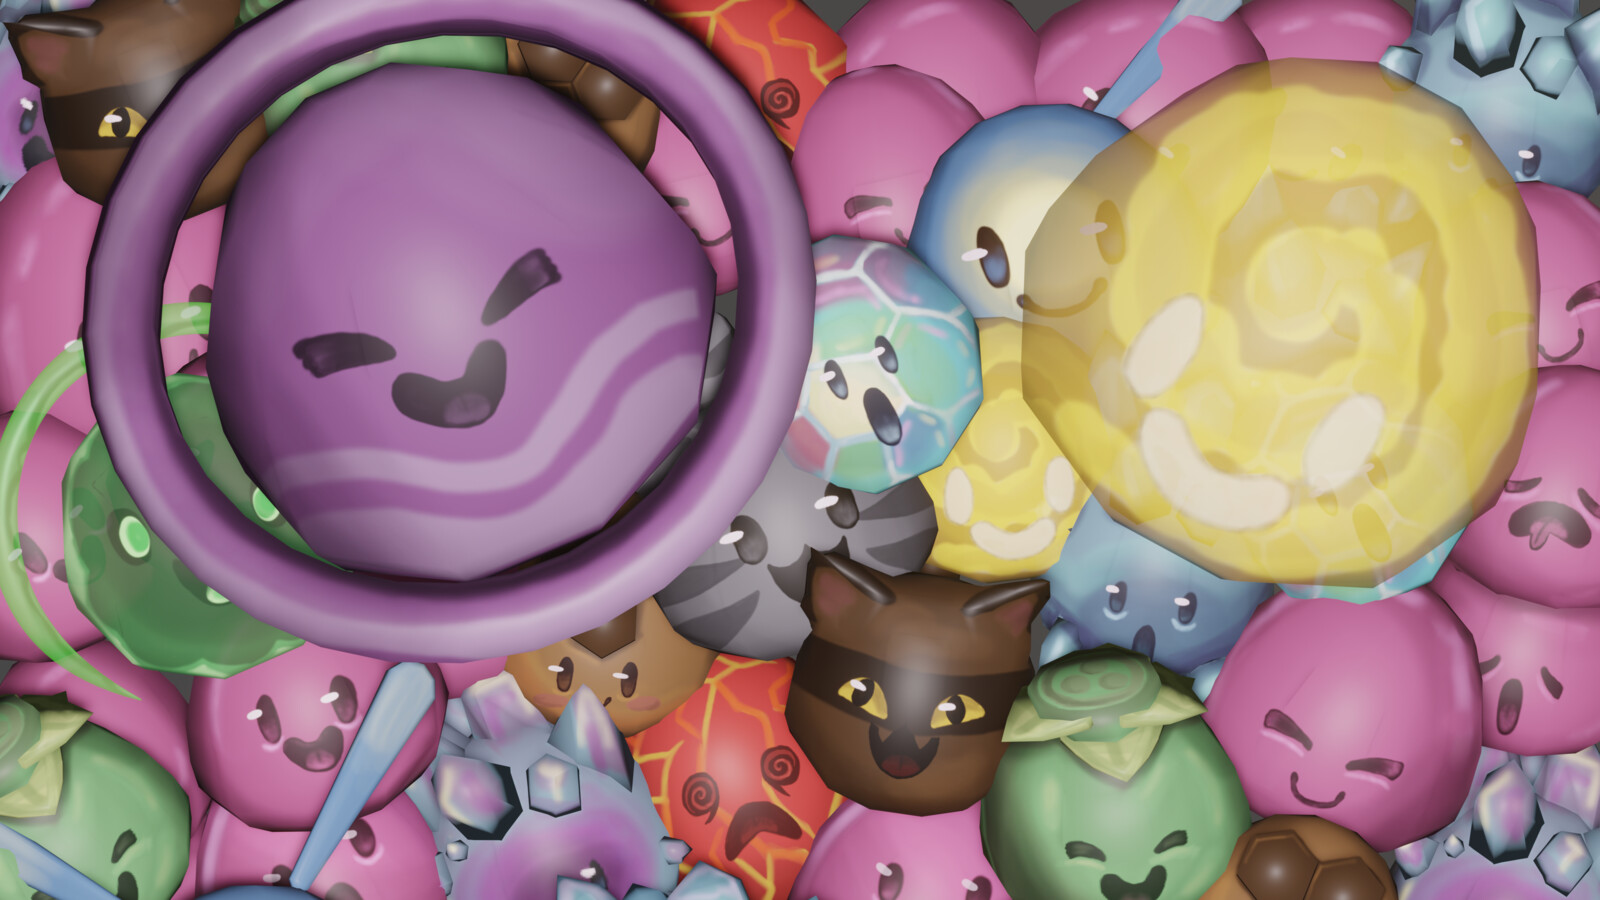 Close-up of some of the slimes at the top of the scene, including the slightly transparent Quantum slime. Looking closely, you can see a shocked mosiac slime below the quantum through it's transparent body.